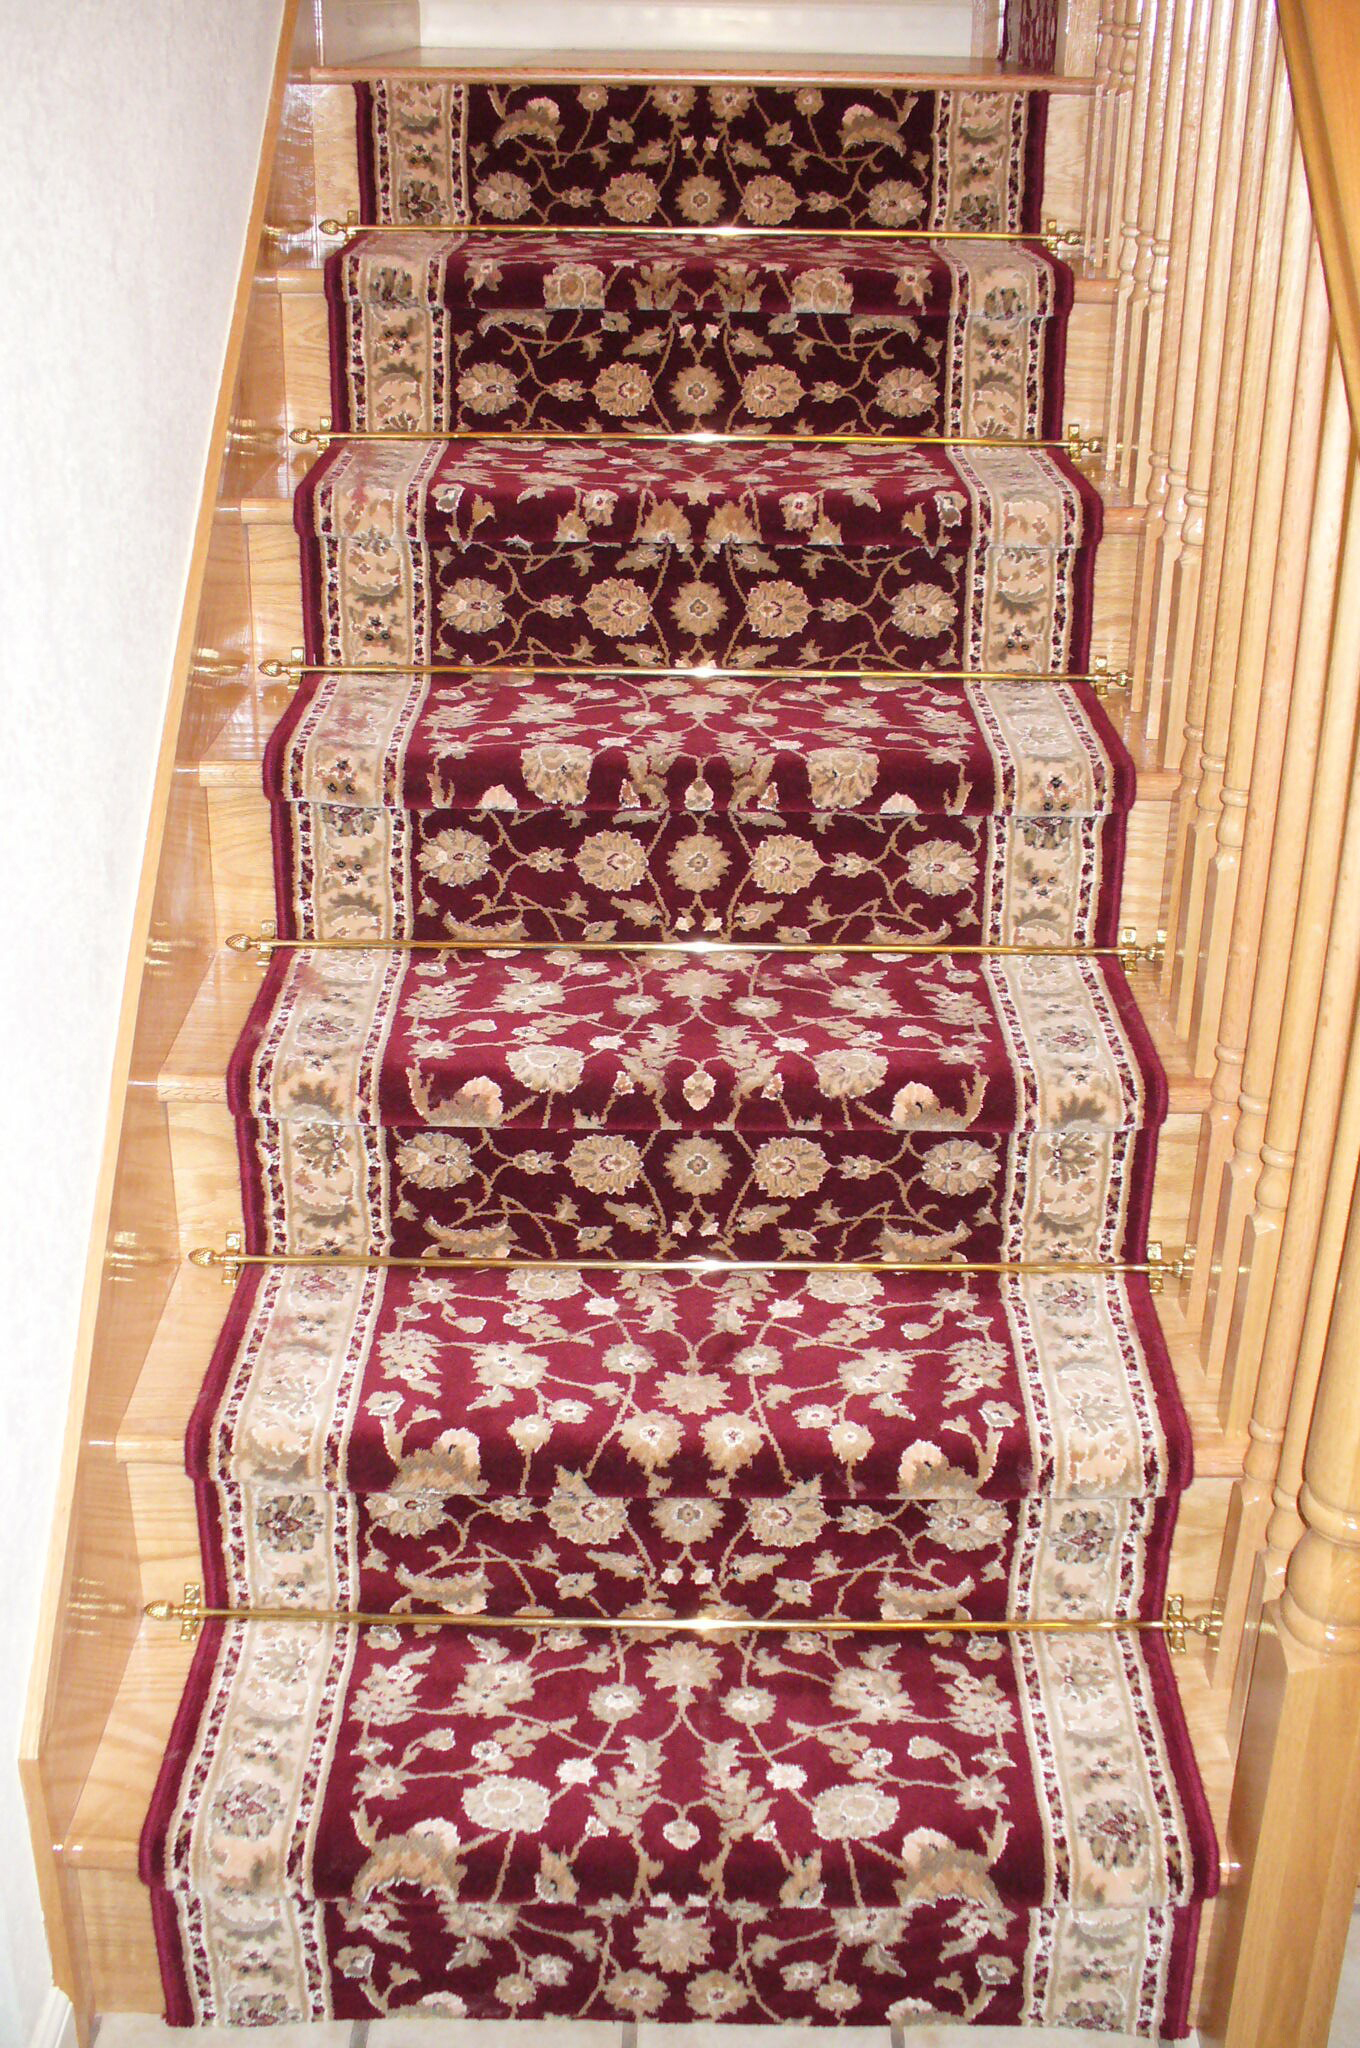 Carpeting on staircase